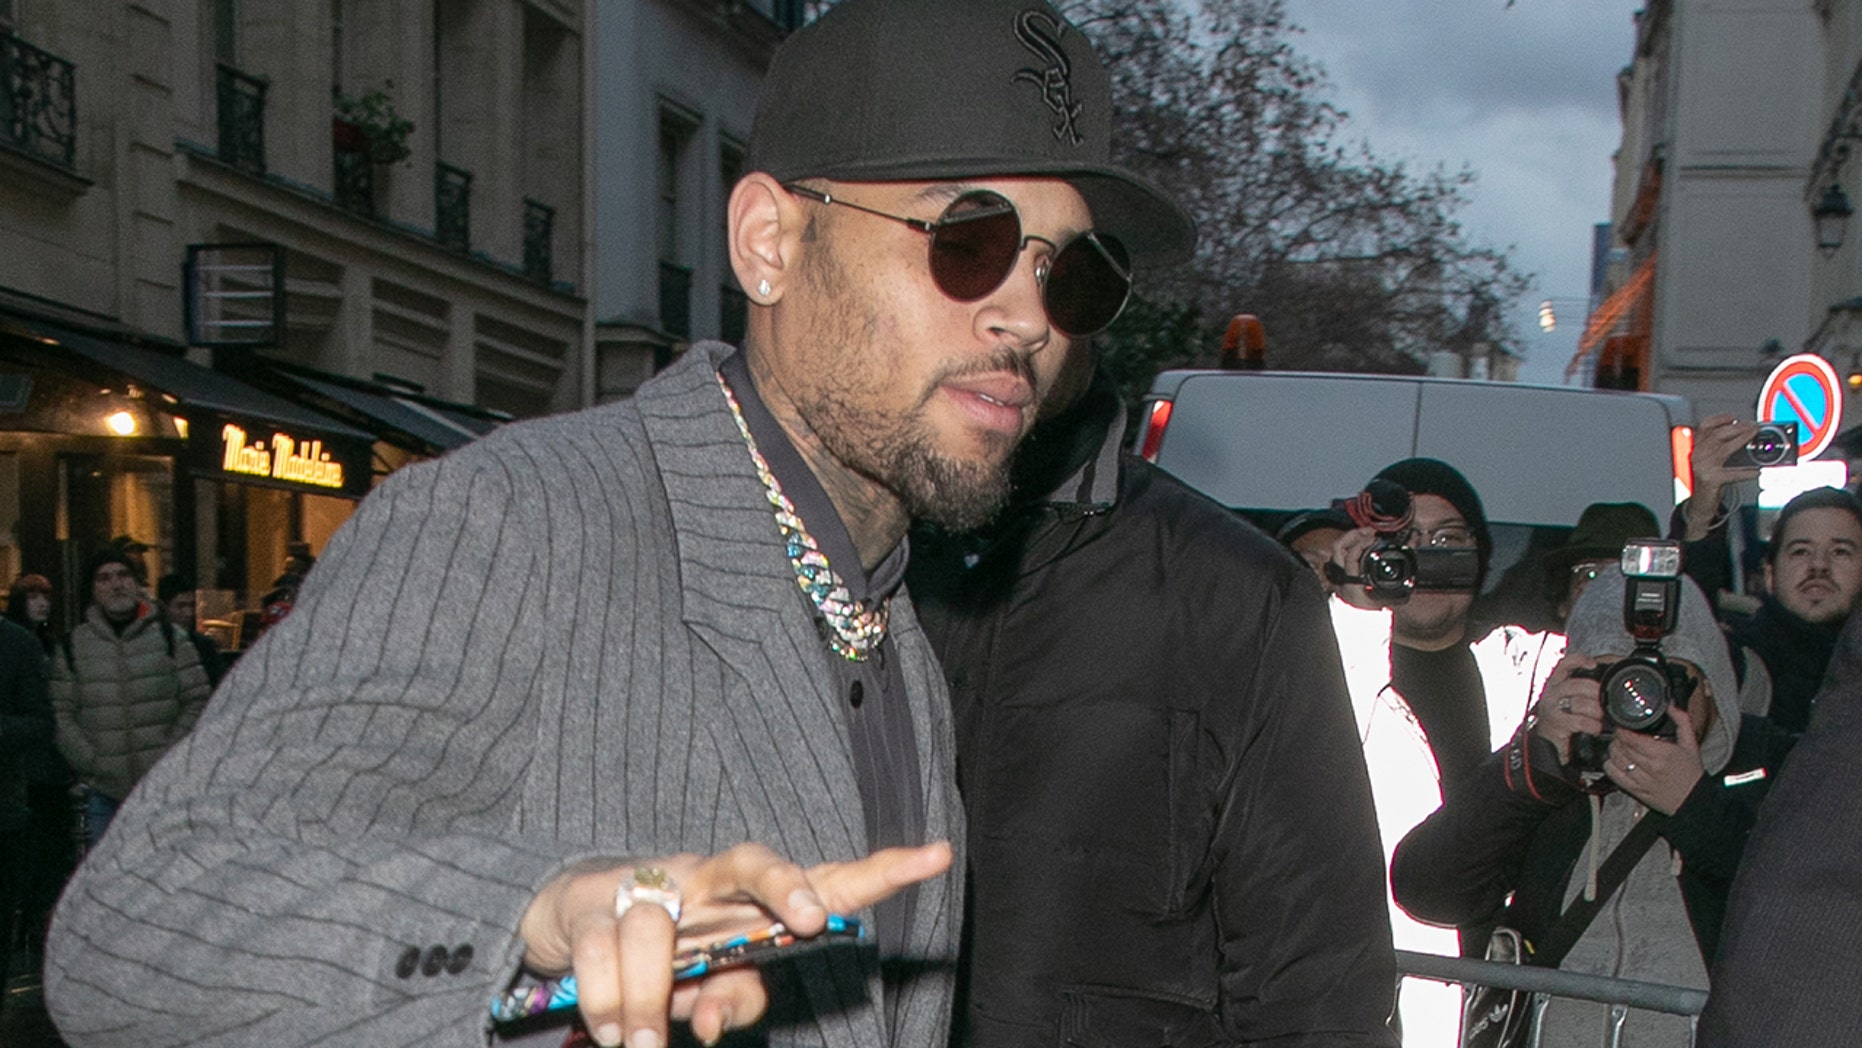 Chris Brown, two others detained in Paris over rape complaint, officials say